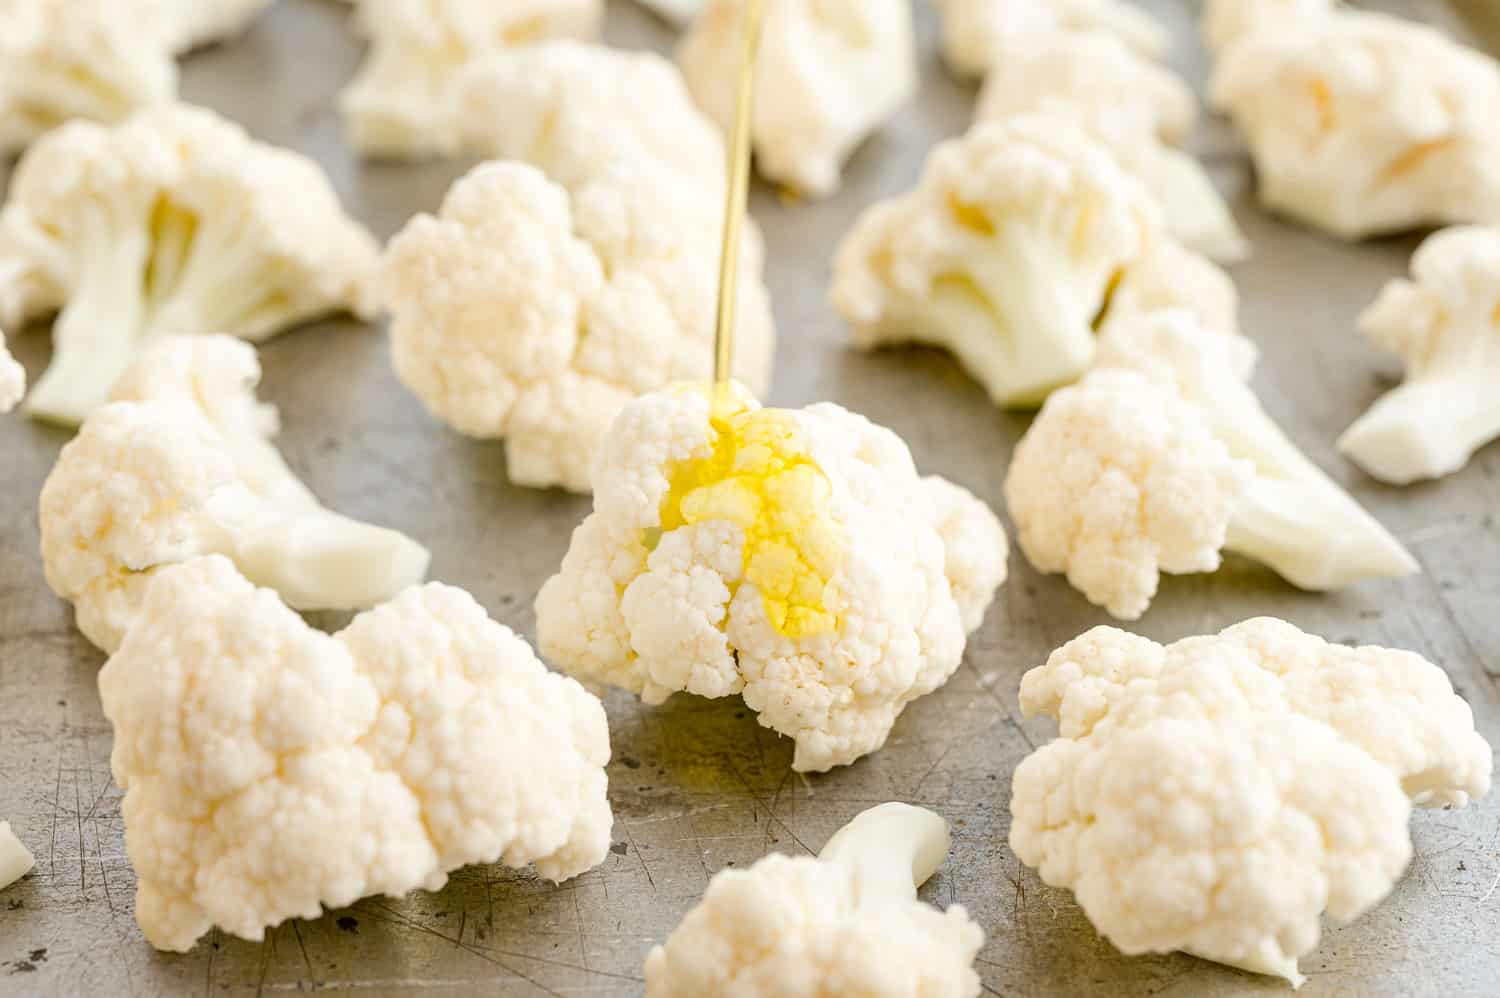 Olive oil being poured on cauliflower.